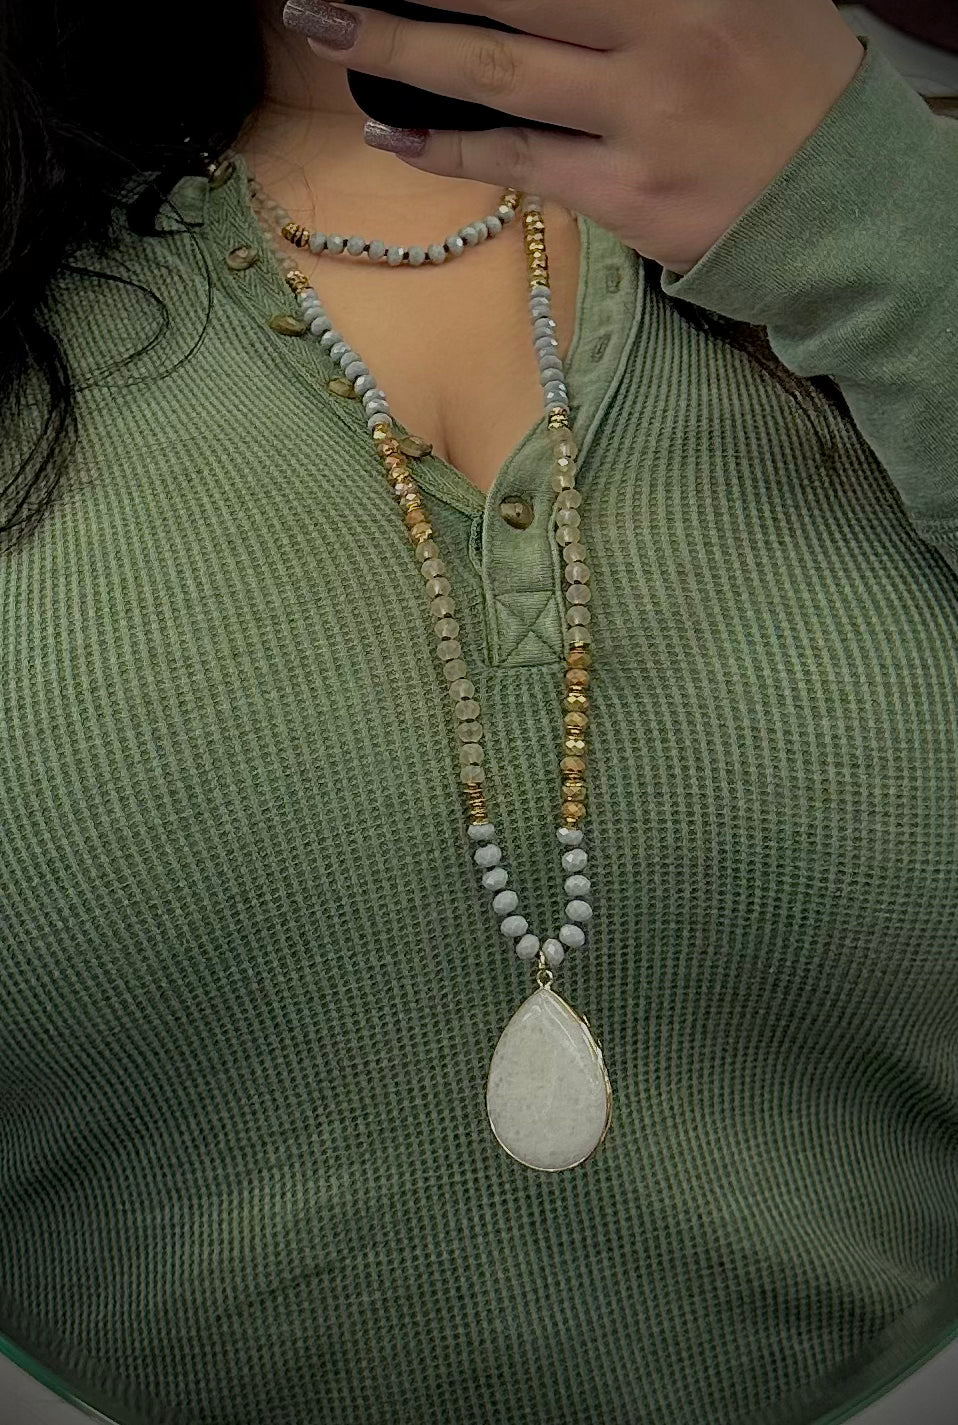 Shamelessly Sparkly Tear Drop Stone Necklace with Beads